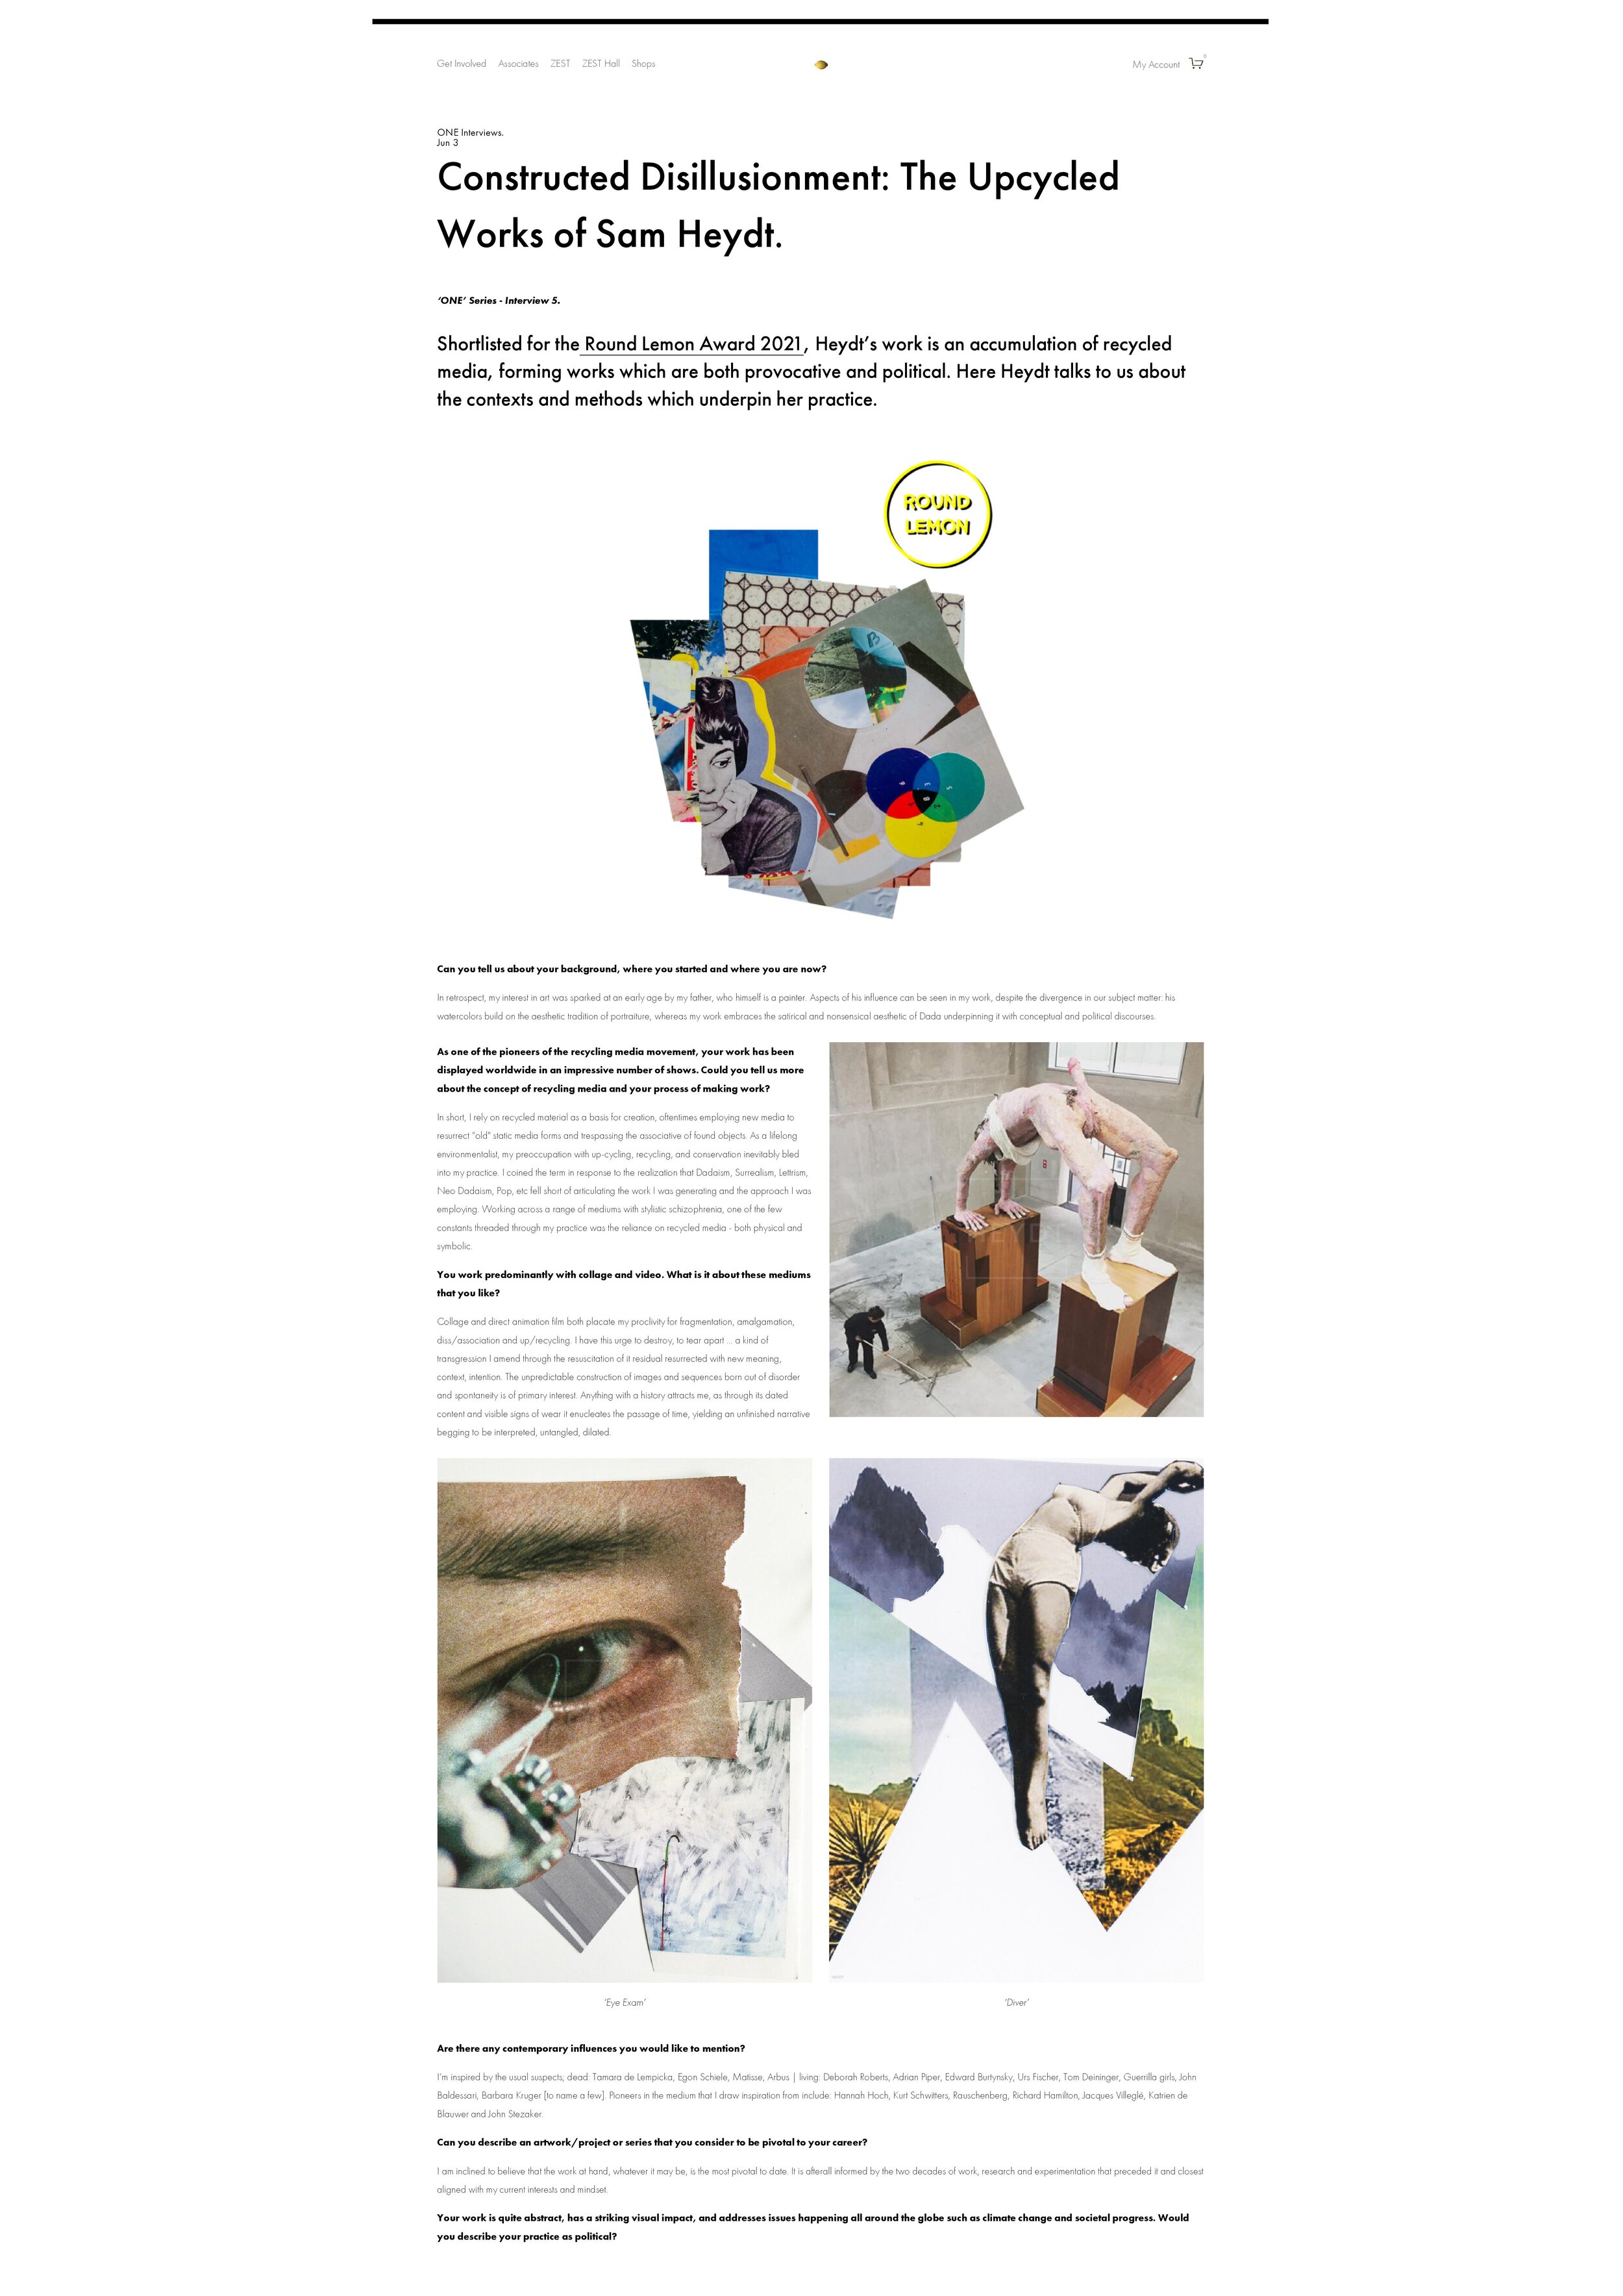 Constructed Disillusionment_ The Upcycled Works of Sam Heydt. — Round Lemon-page-001.jpg